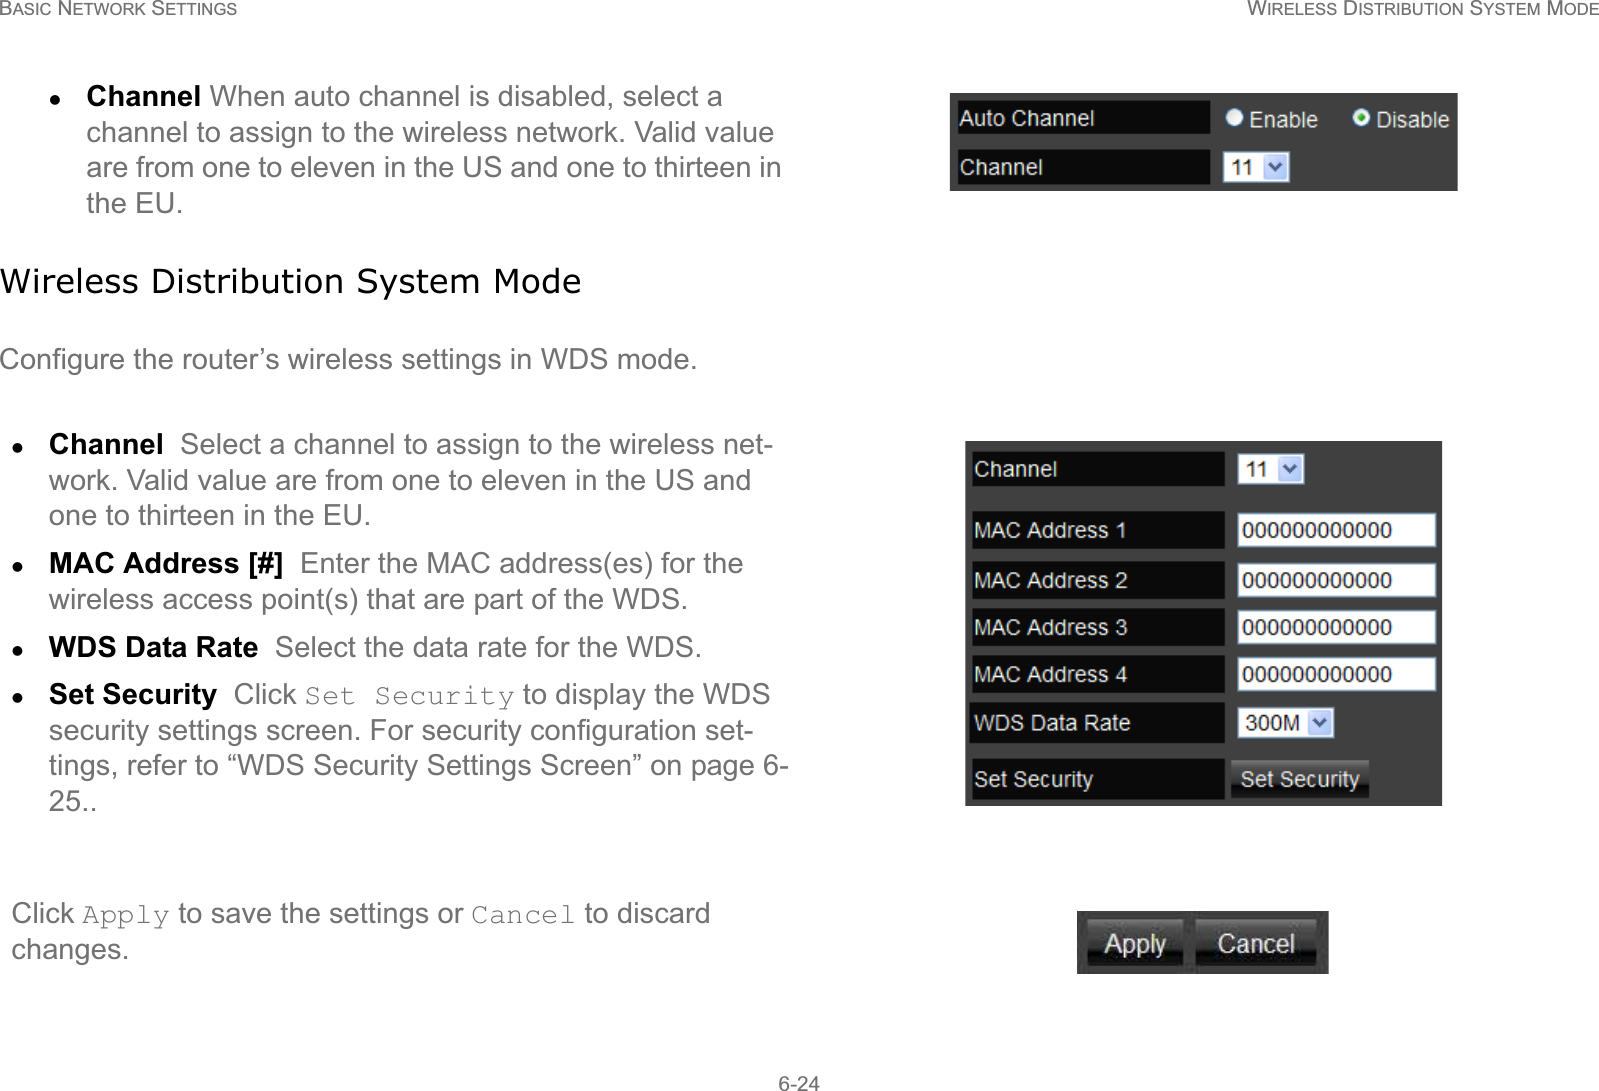 BASIC NETWORK SETTINGS WIRELESS DISTRIBUTION SYSTEM MODE6-24Wireless Distribution System ModeConfigure the router’s wireless settings in WDS mode.zChannel When auto channel is disabled, select a channel to assign to the wireless network. Valid value are from one to eleven in the US and one to thirteen in the EU.zChannel  Select a channel to assign to the wireless net-work. Valid value are from one to eleven in the US and one to thirteen in the EU.zMAC Address [#]  Enter the MAC address(es) for the wireless access point(s) that are part of the WDS.zWDS Data Rate  Select the data rate for the WDS.zSet Security  Click Set Security to display the WDS security settings screen. For security configuration set-tings, refer to “WDS Security Settings Screen” on page 6-25..Click Apply to save the settings or Cancel to discard changes.